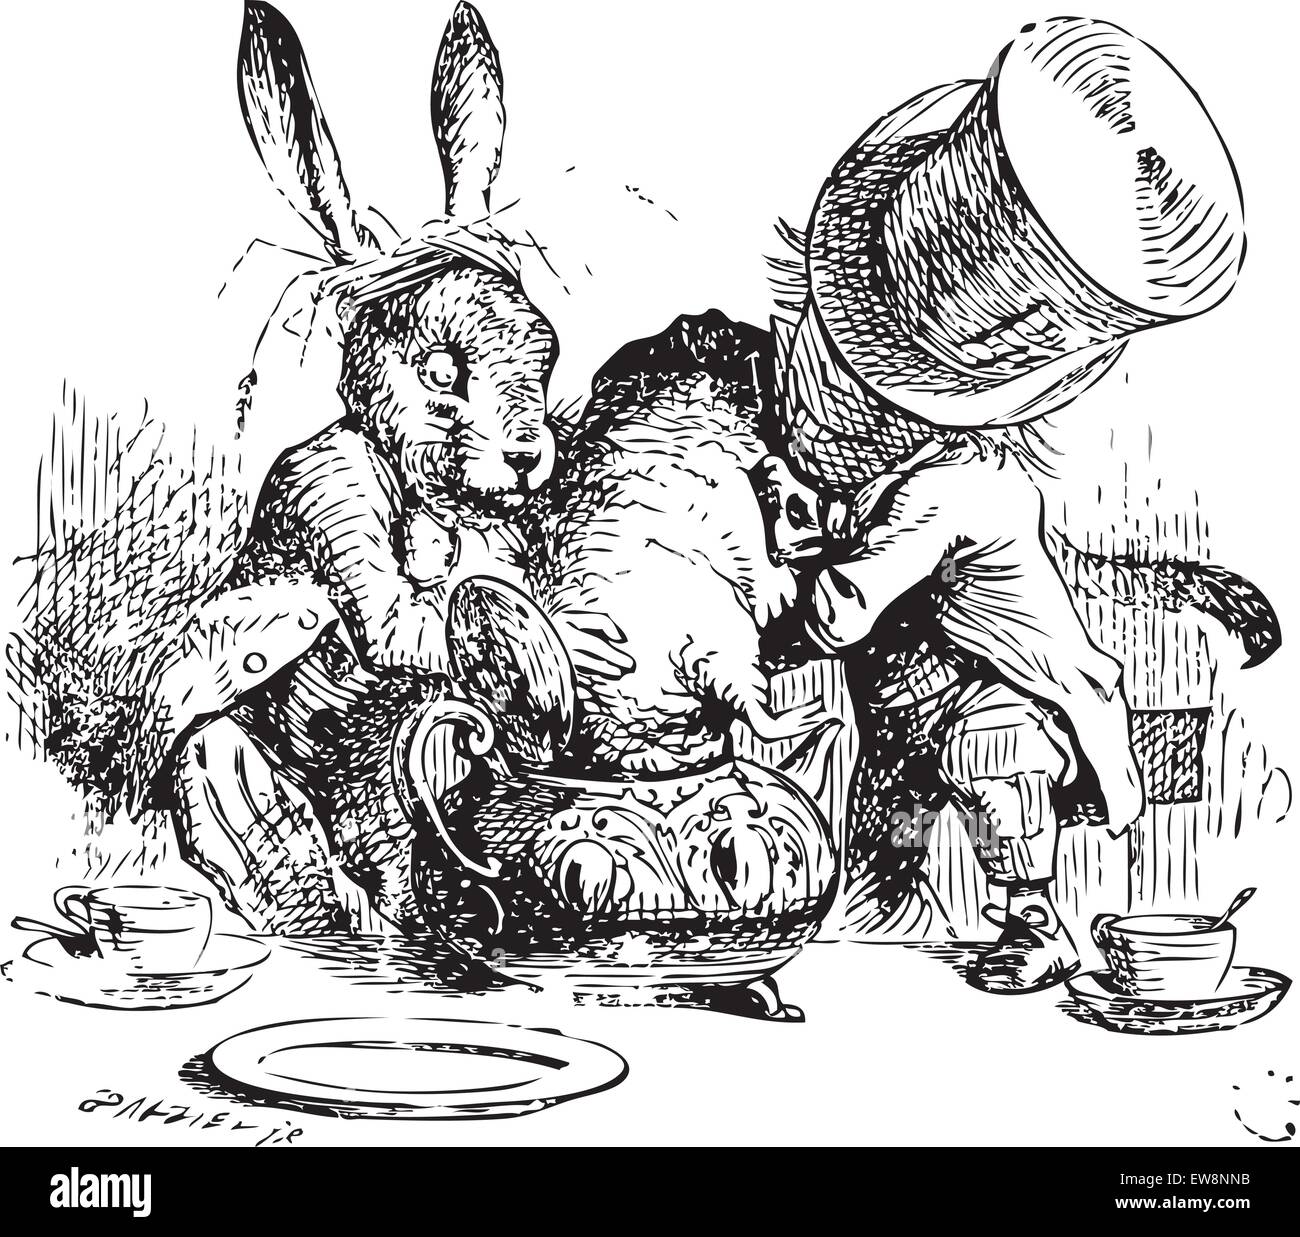 Mad Hatter and March Hare dunking the Dormouse. ...the last time she saw them, they were trying to put the Dormouse into the teapot. Alice's Adventures in Wonderland original vintage illustration. Illustration from John Tenniel, published in 1865. Stock Vector